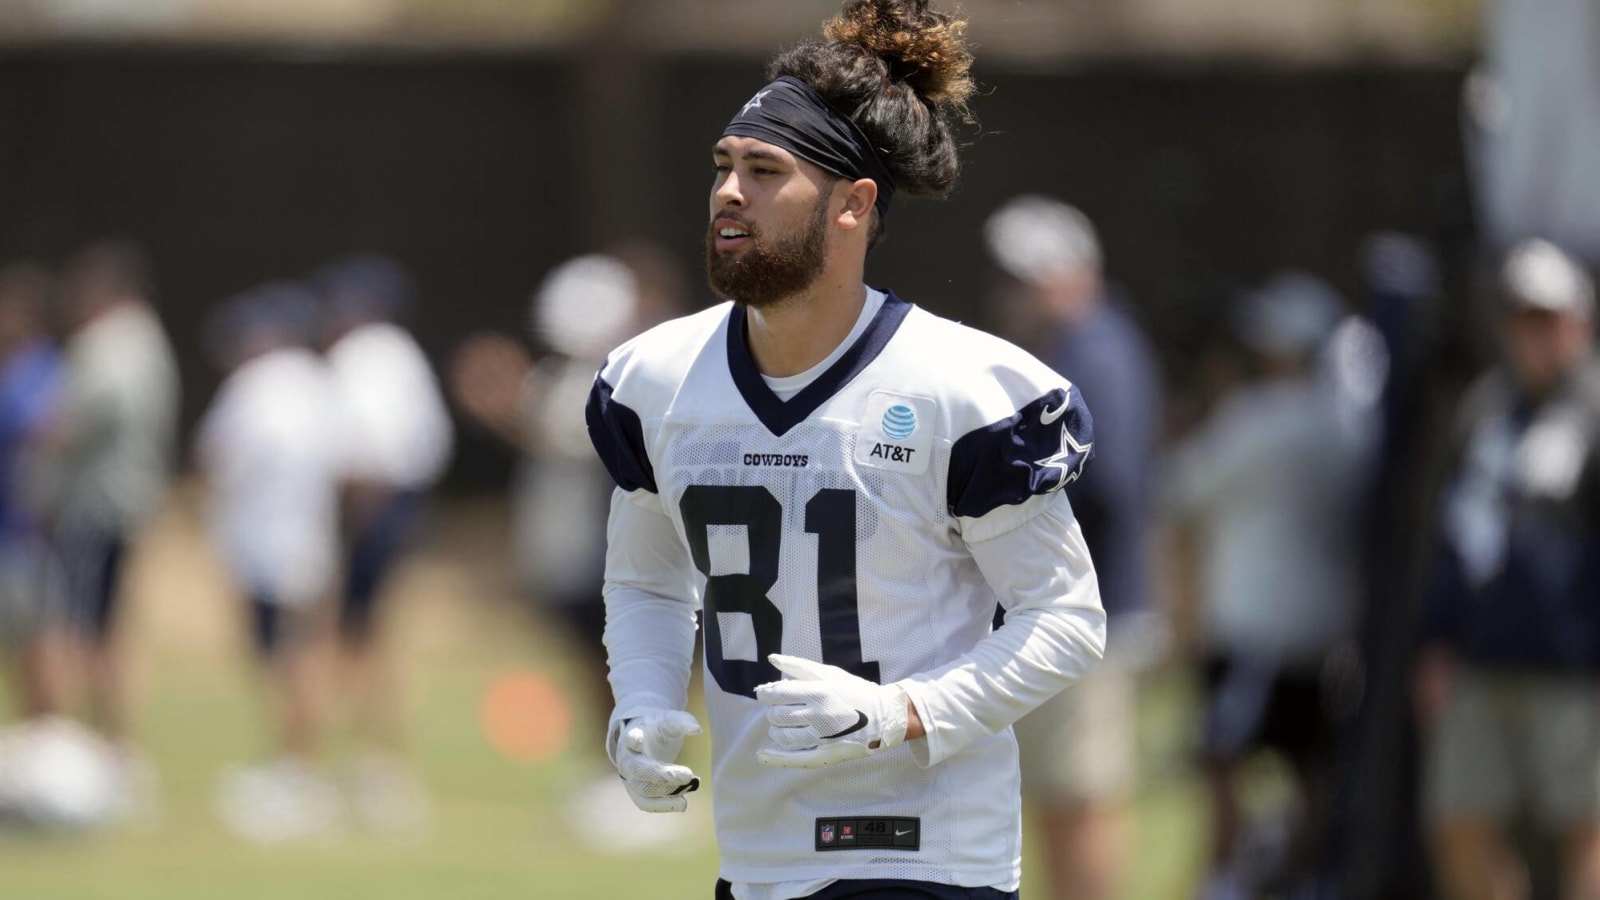 This third-year receiver poised for breakout season in Dallas